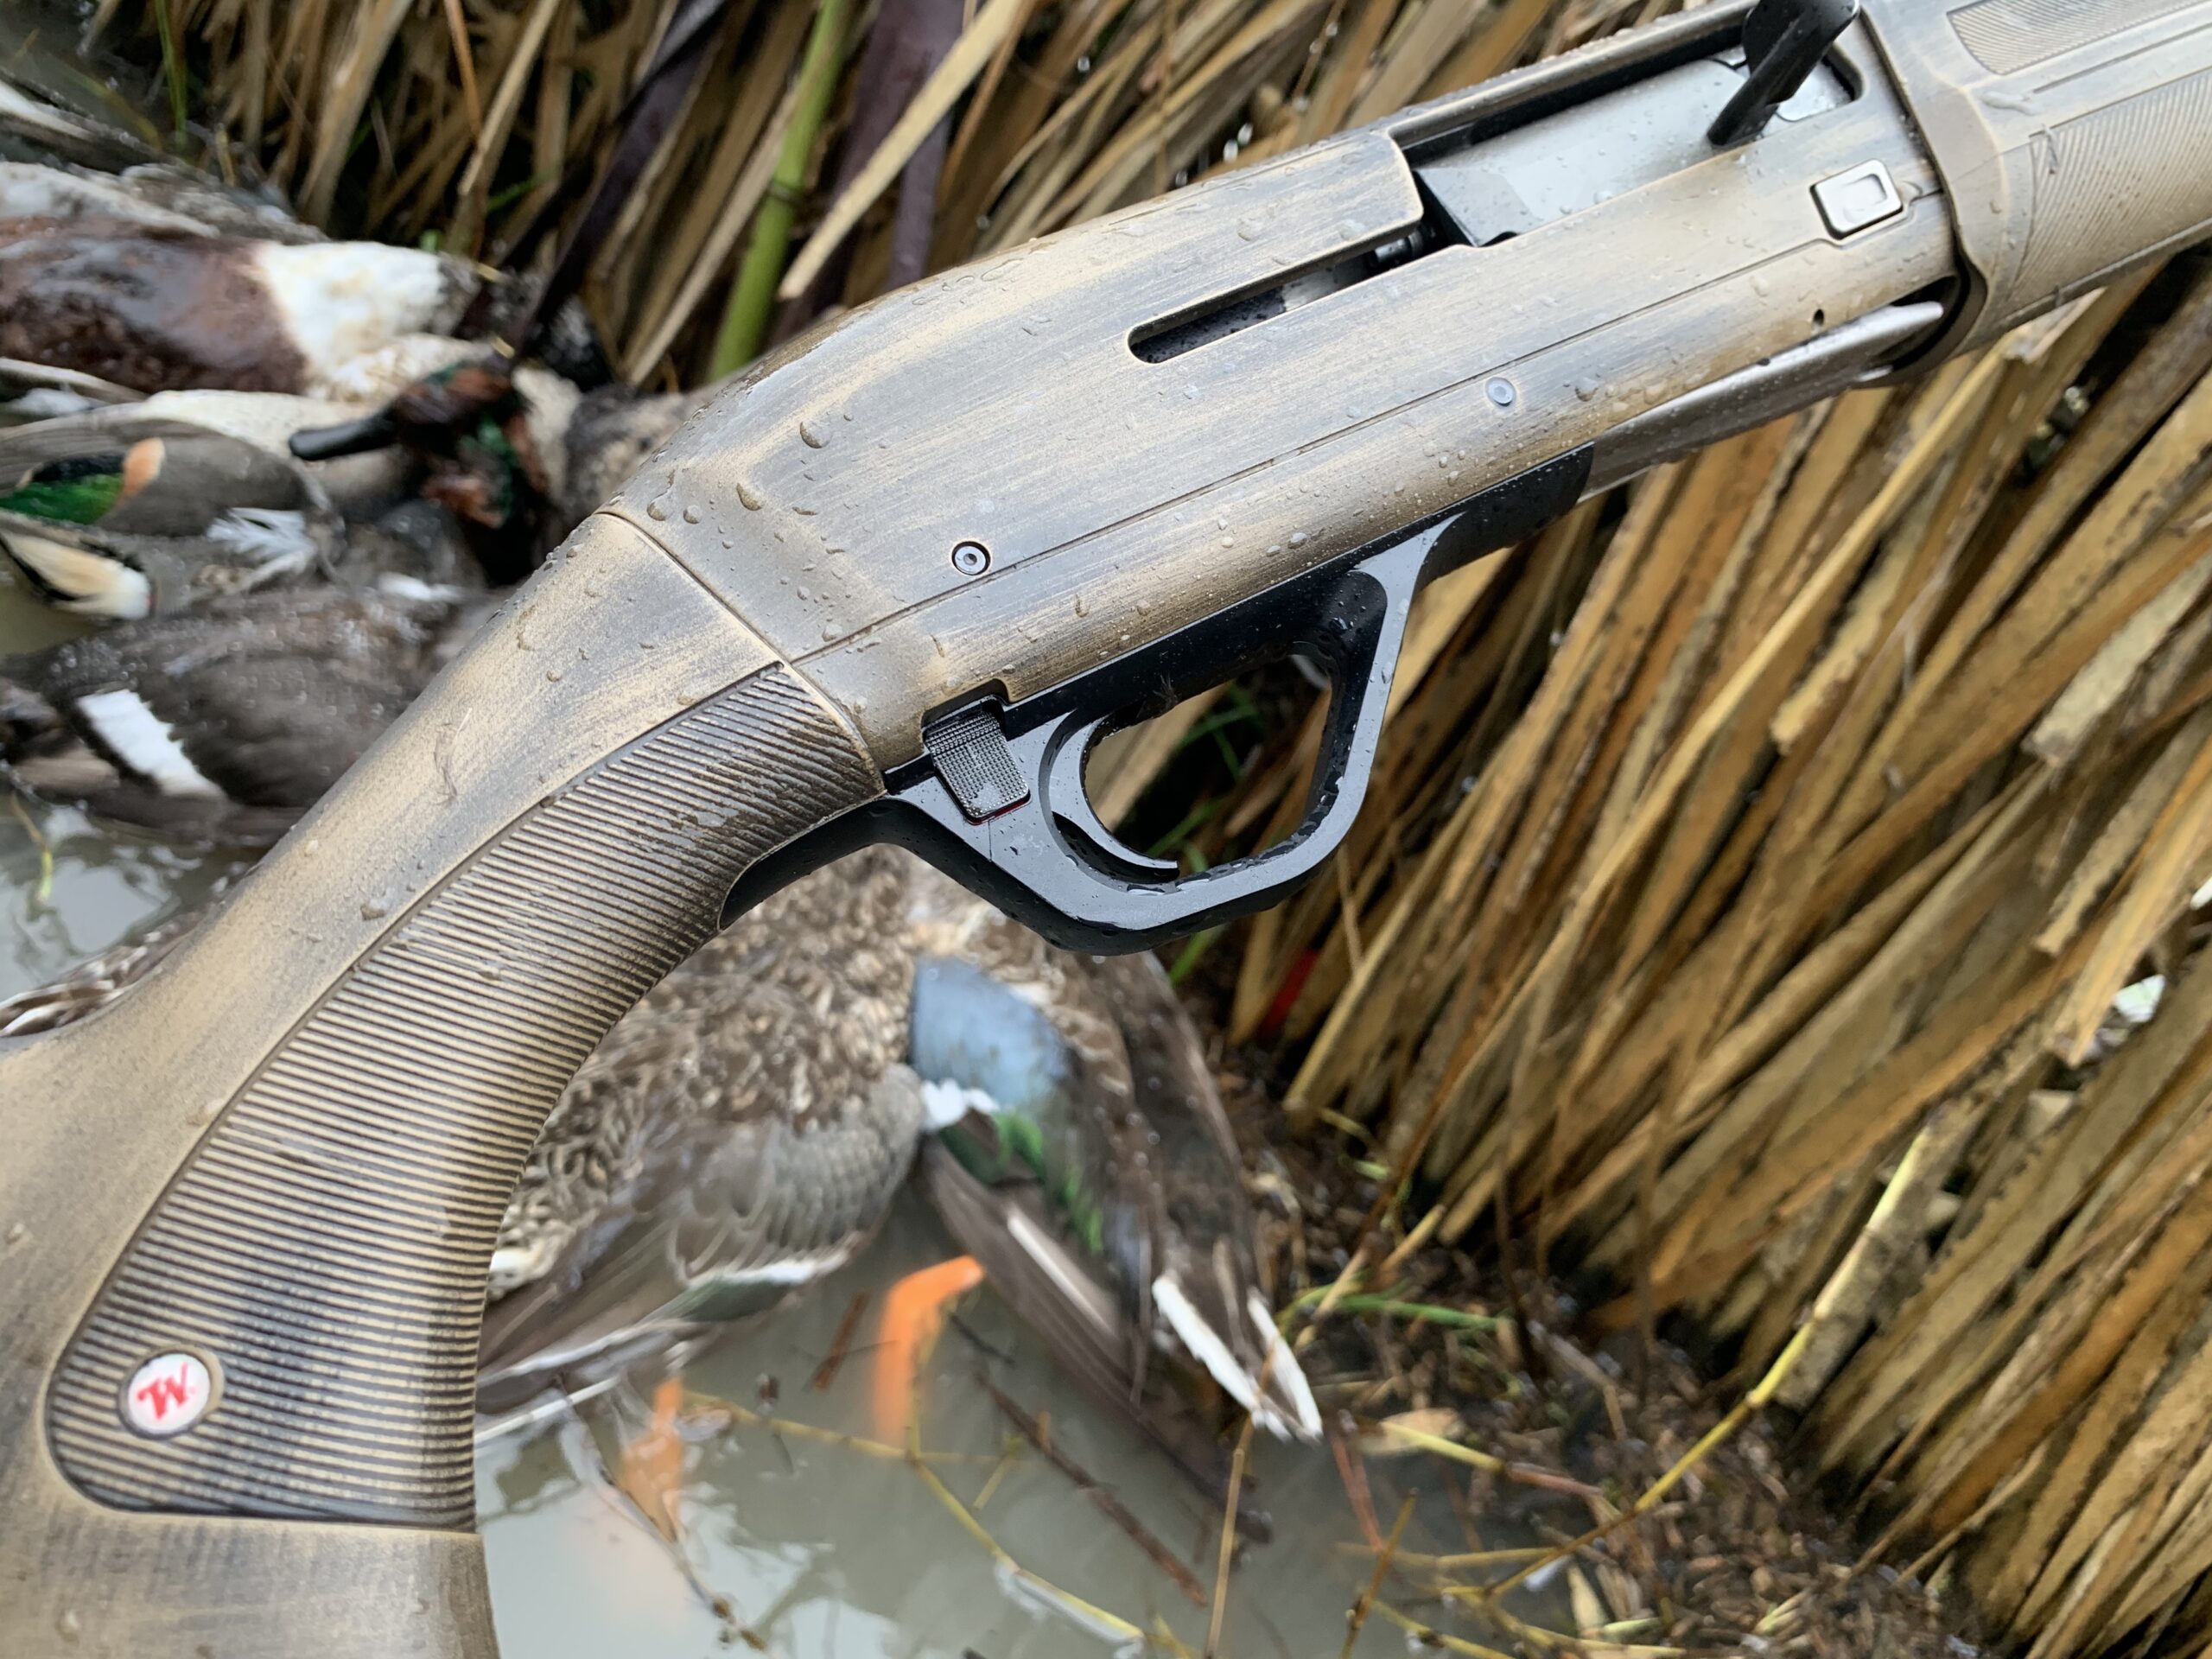 Putting the SX4 to the test on Texas ducks.